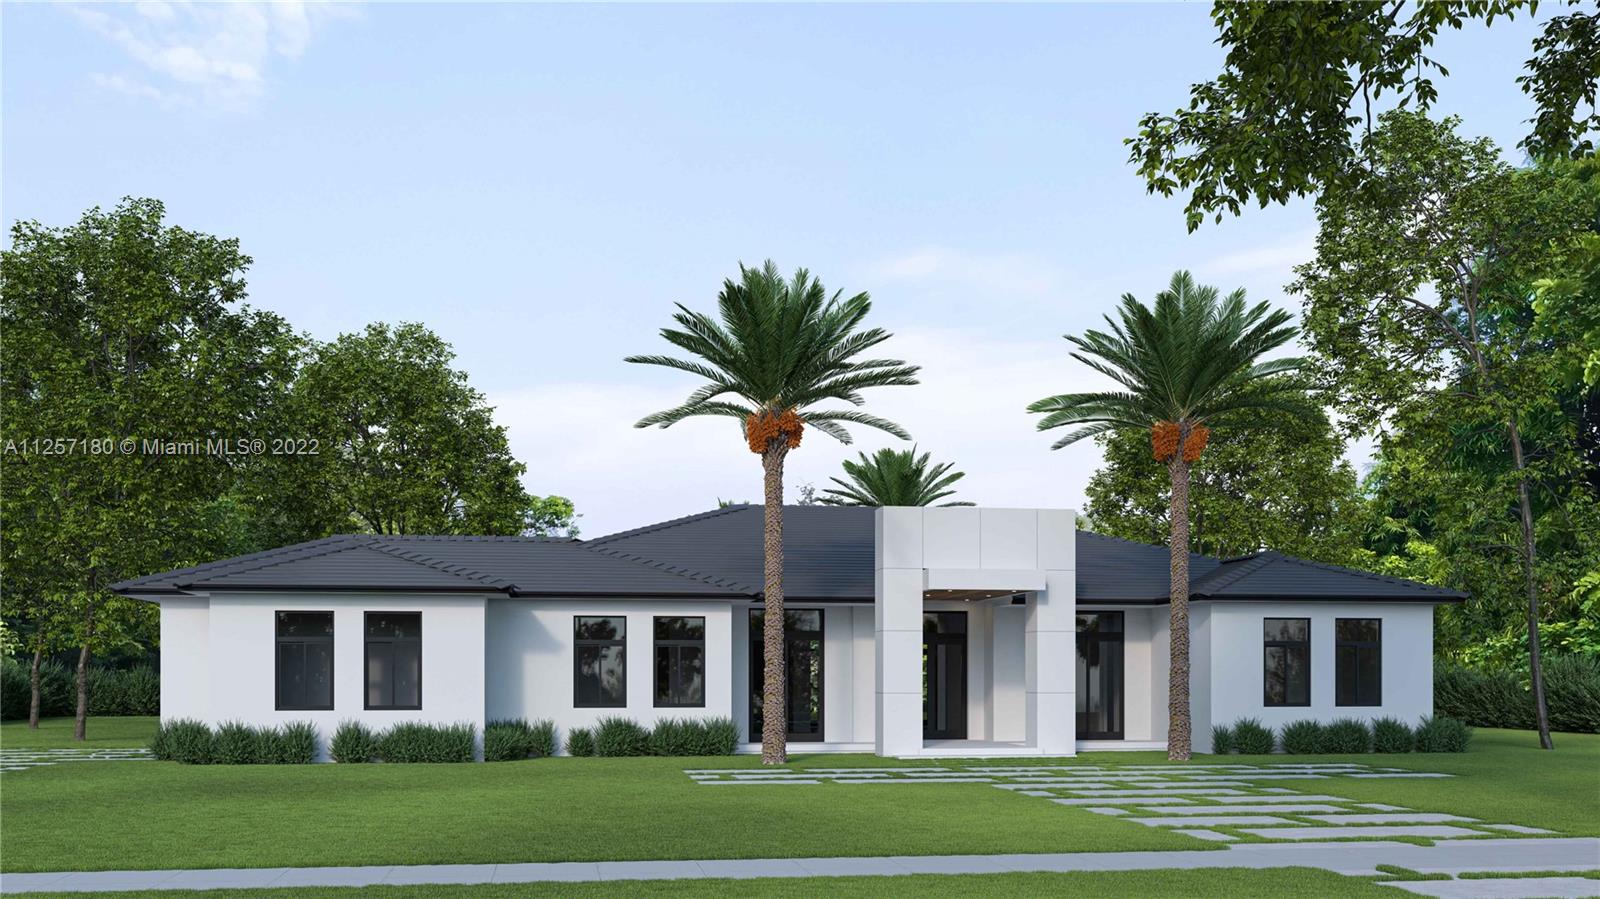 Spectacular new construction custom-built home in Palmetto Bay on a large 28,428 SF lot. This one-of-a-kind dream home will feature 5,700 total SF (4,350 under AC), boasting 5-bedrooms and 5.5 Bathrooms. This luxurious estate will feature a large 2-car garage, 12-14FT ceilings throughout, grand and open common areas for entertaining, high end finishes and appliances, custom cabinetry from Veneta Cucine, custom indoor and outdoor TV wall with recessed fireplace, 200+ glass enclosed wine closet with bar, 20x15 pool with a large swimout-sundeck, Energy Efficient Smart automated home and smart features throughout, impact windows & doors, very large concrete pad driveway, and much more! Must see in person to appreciate. Currently under construction and set to be completed in October 2022.